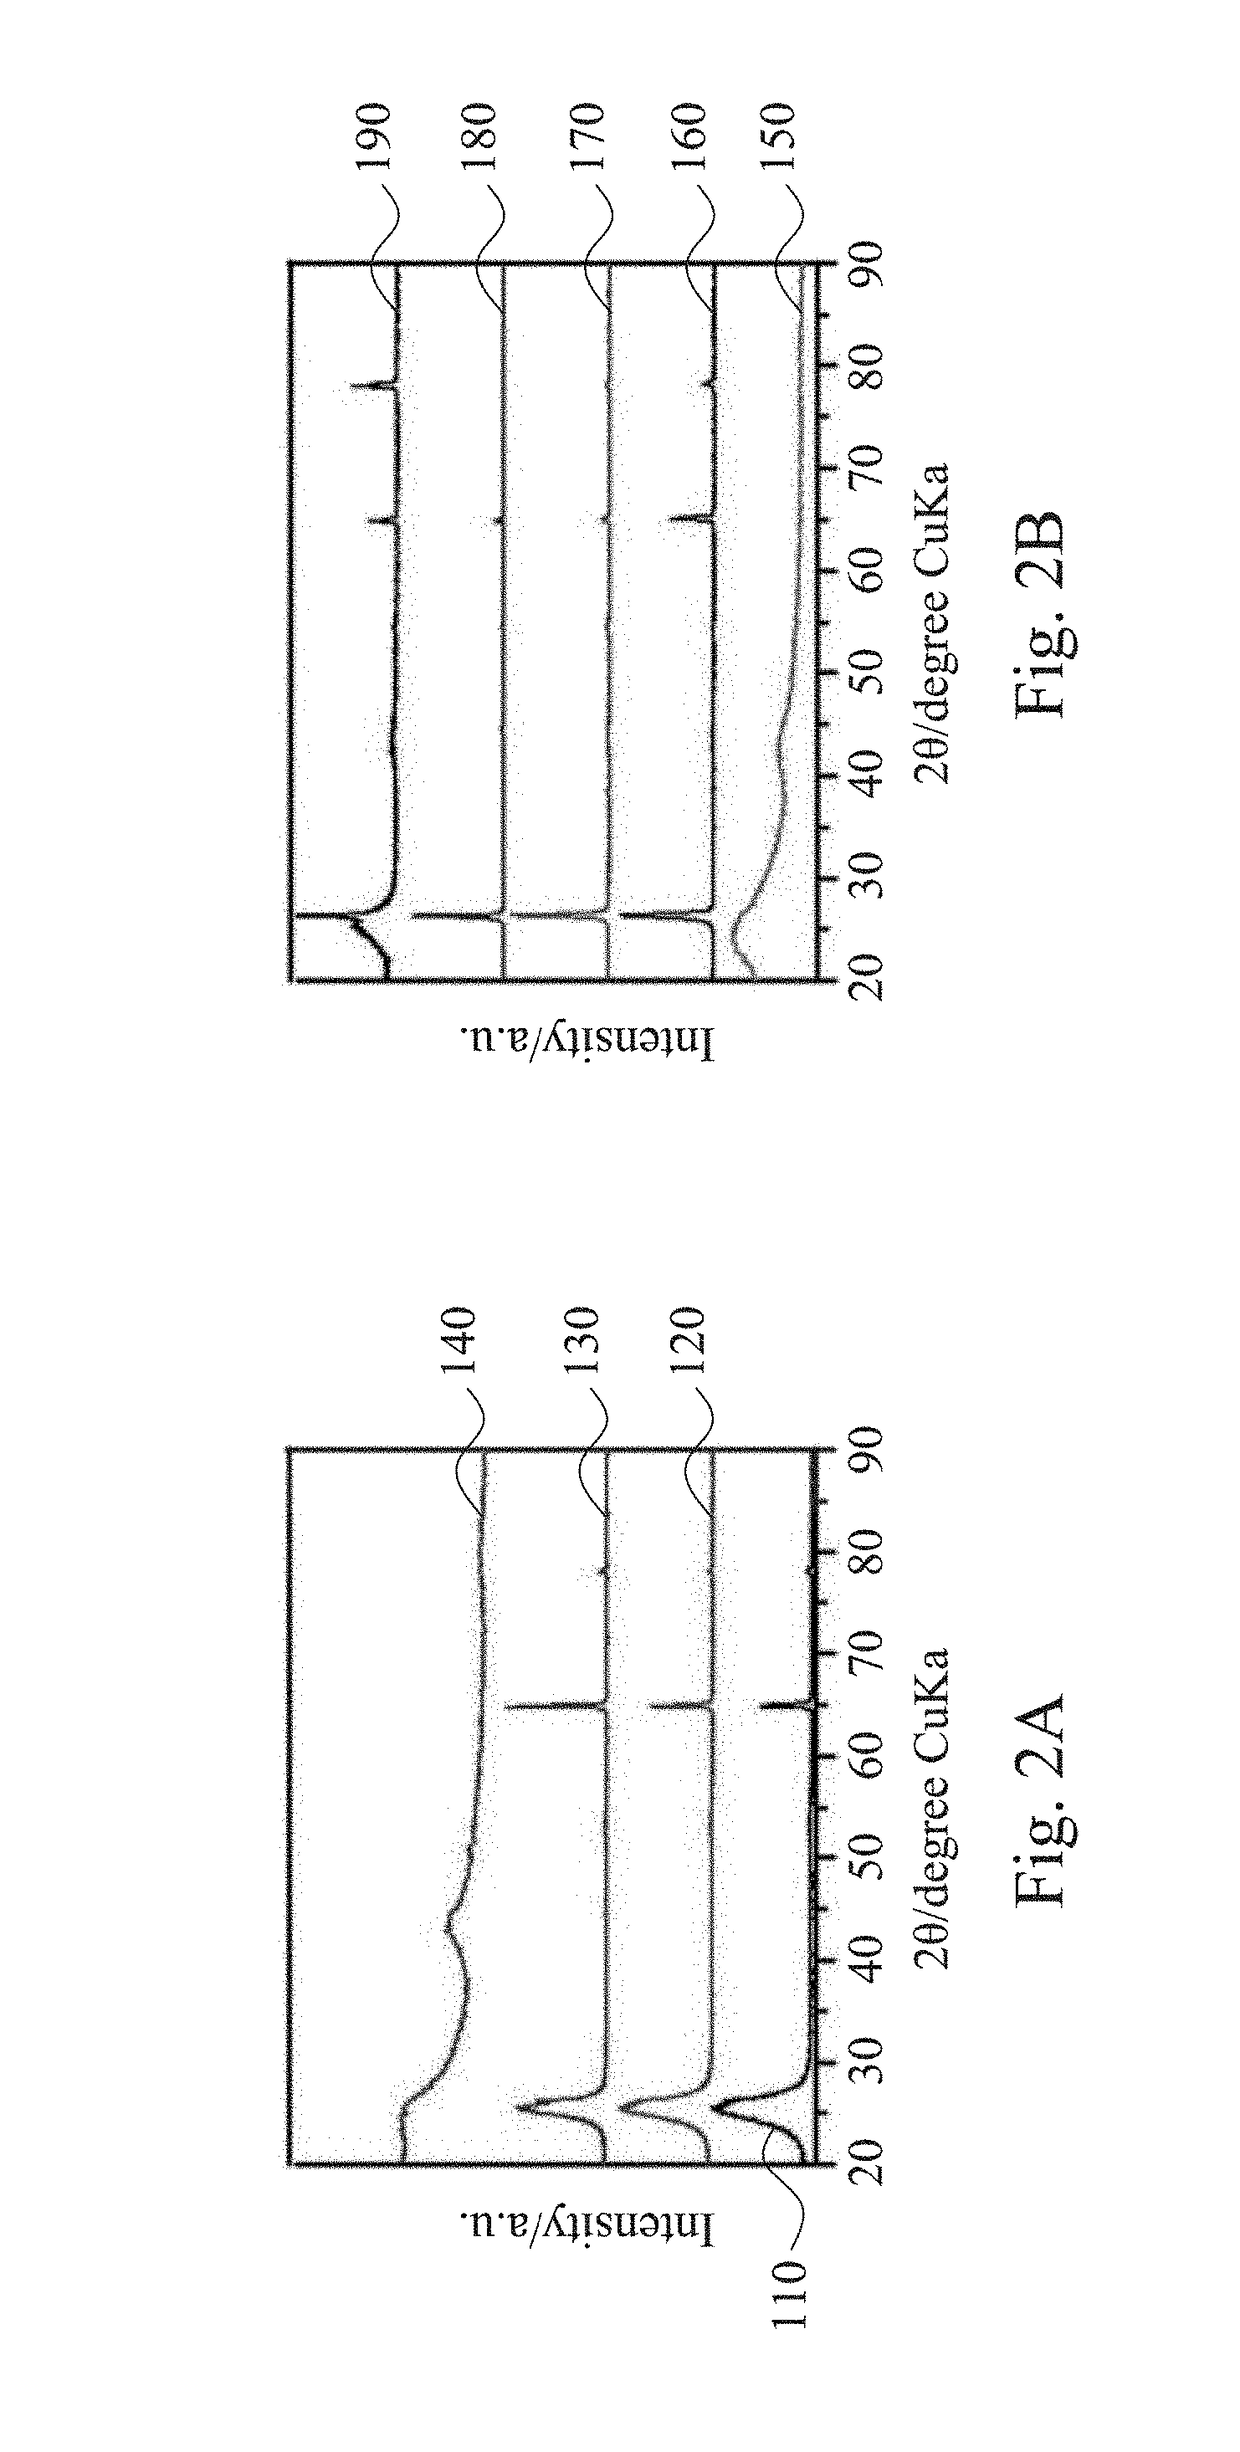 Asymmetric electrical double-layer capacitor using electrochemical activated carbon